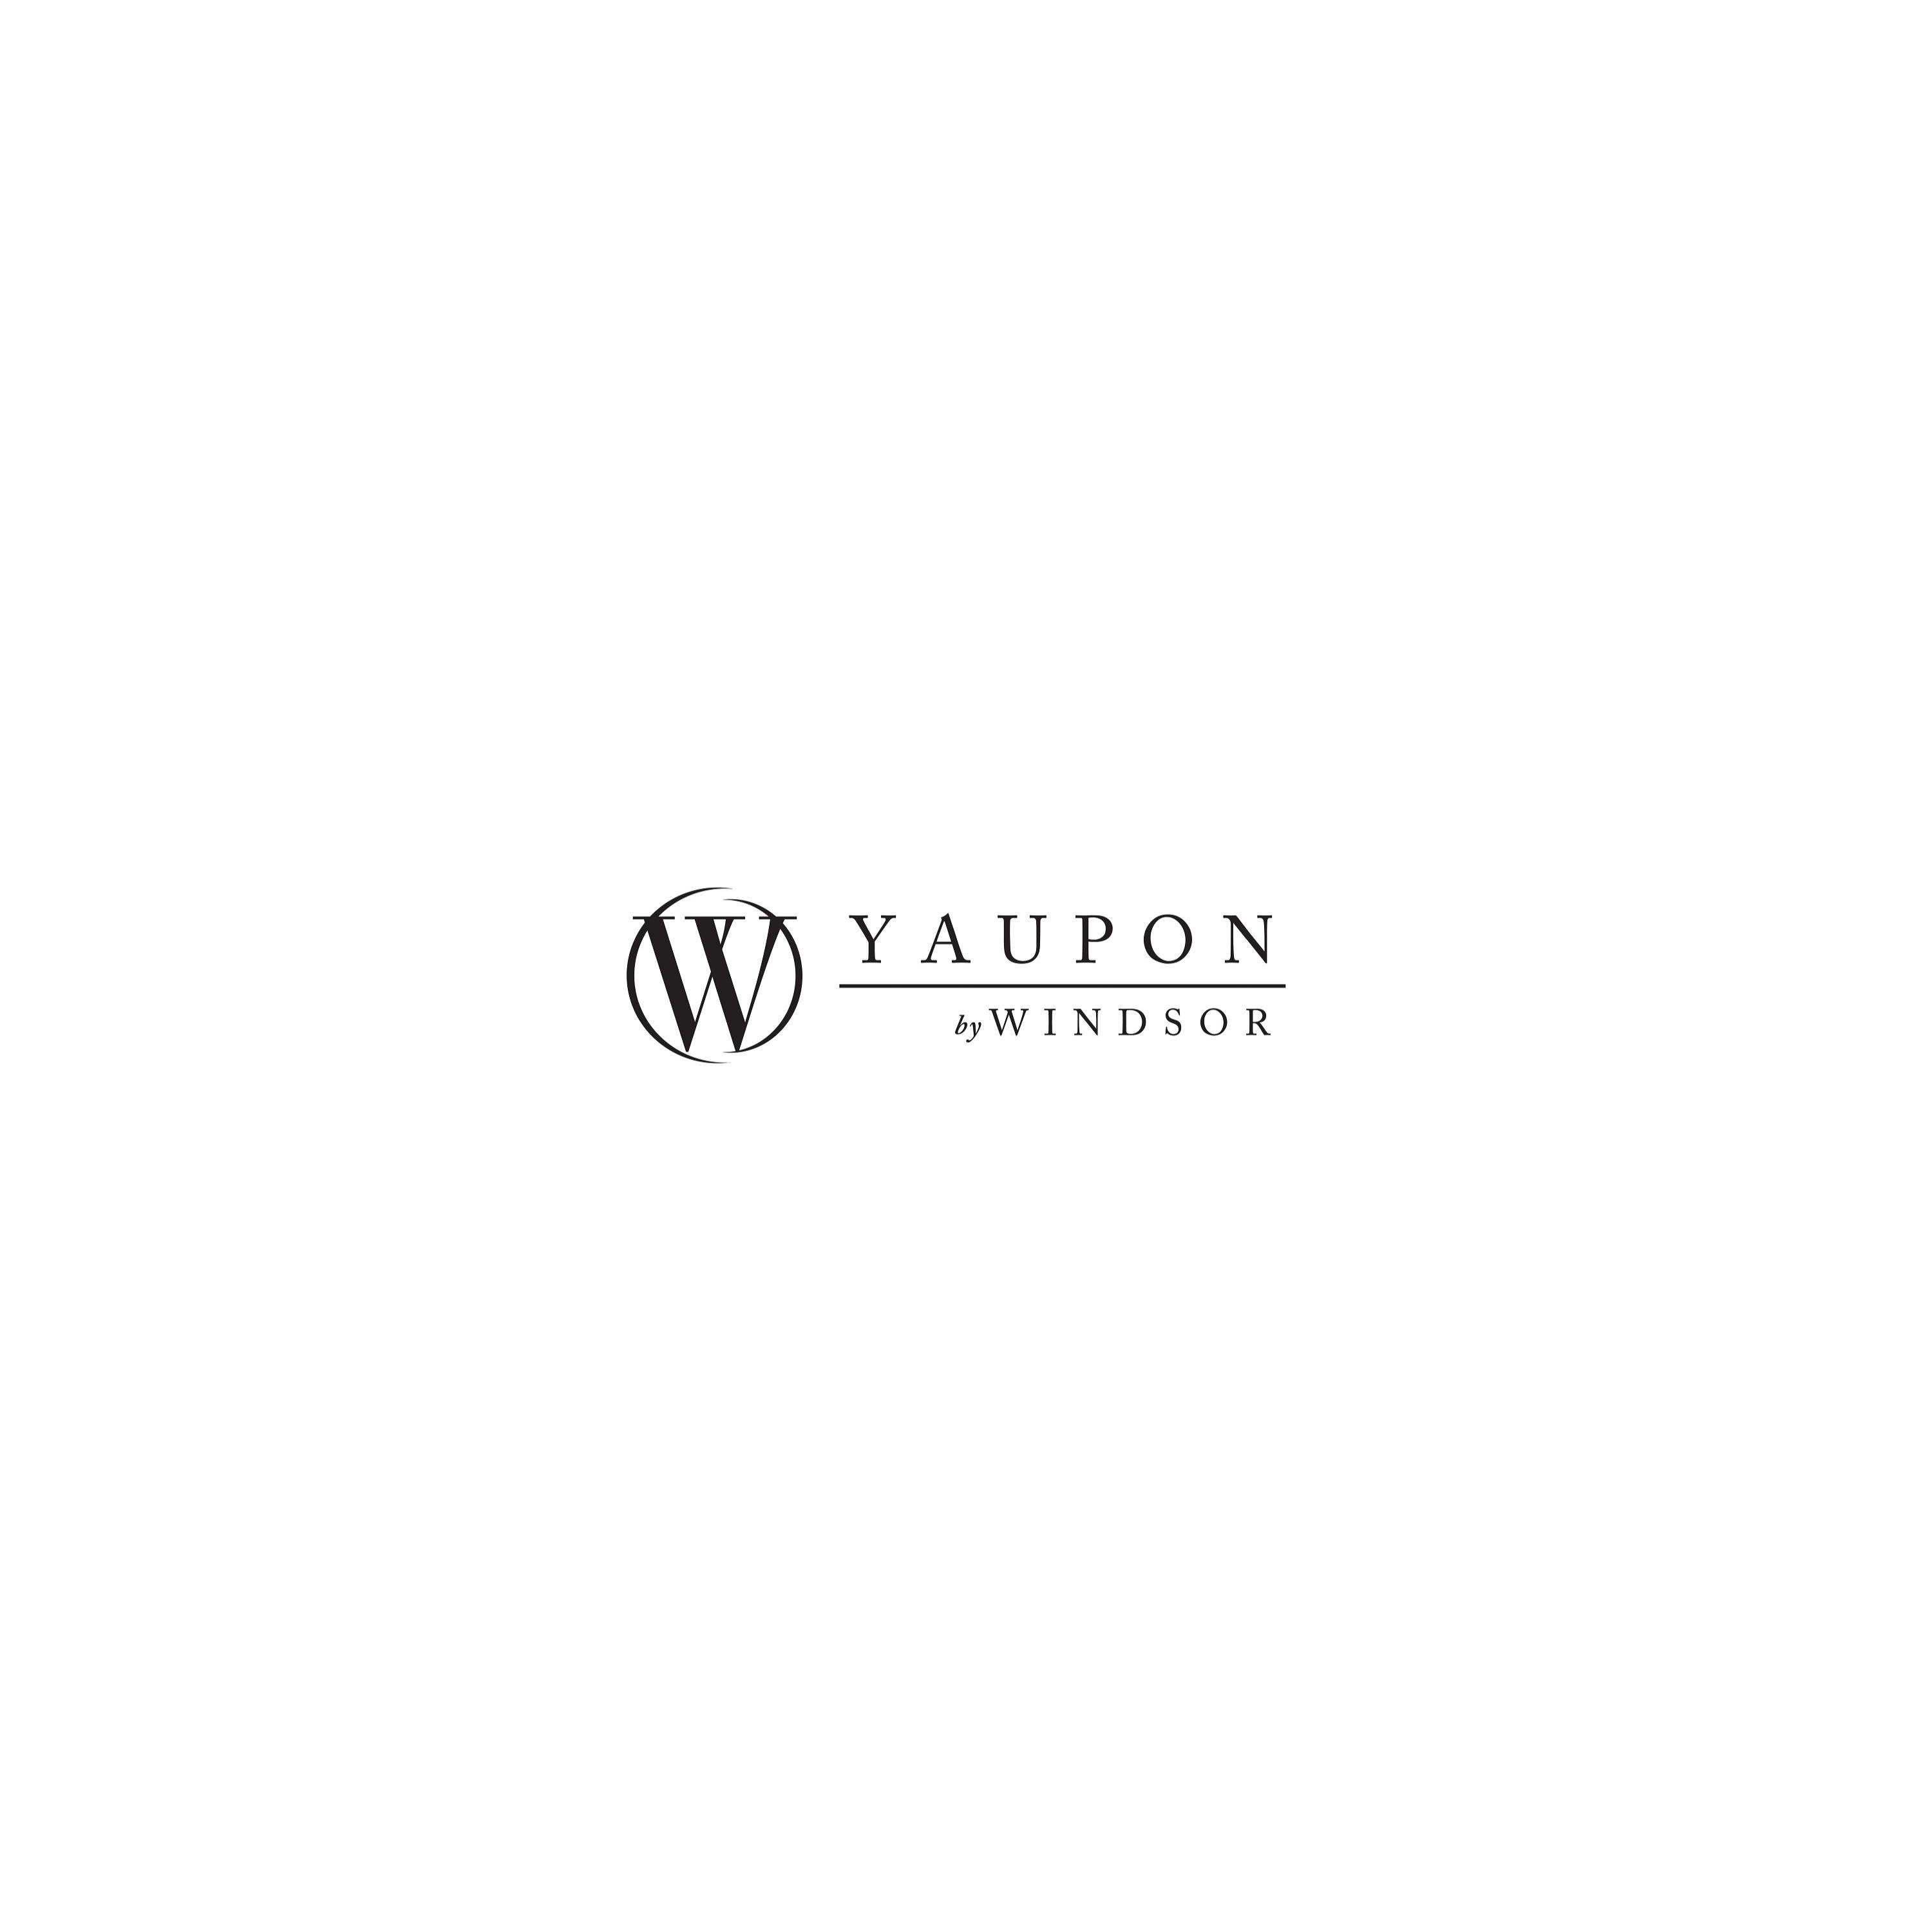 Yaupon by Windsor Apartments - Austin, TX 78736 - (737)258-8101 | ShowMeLocal.com